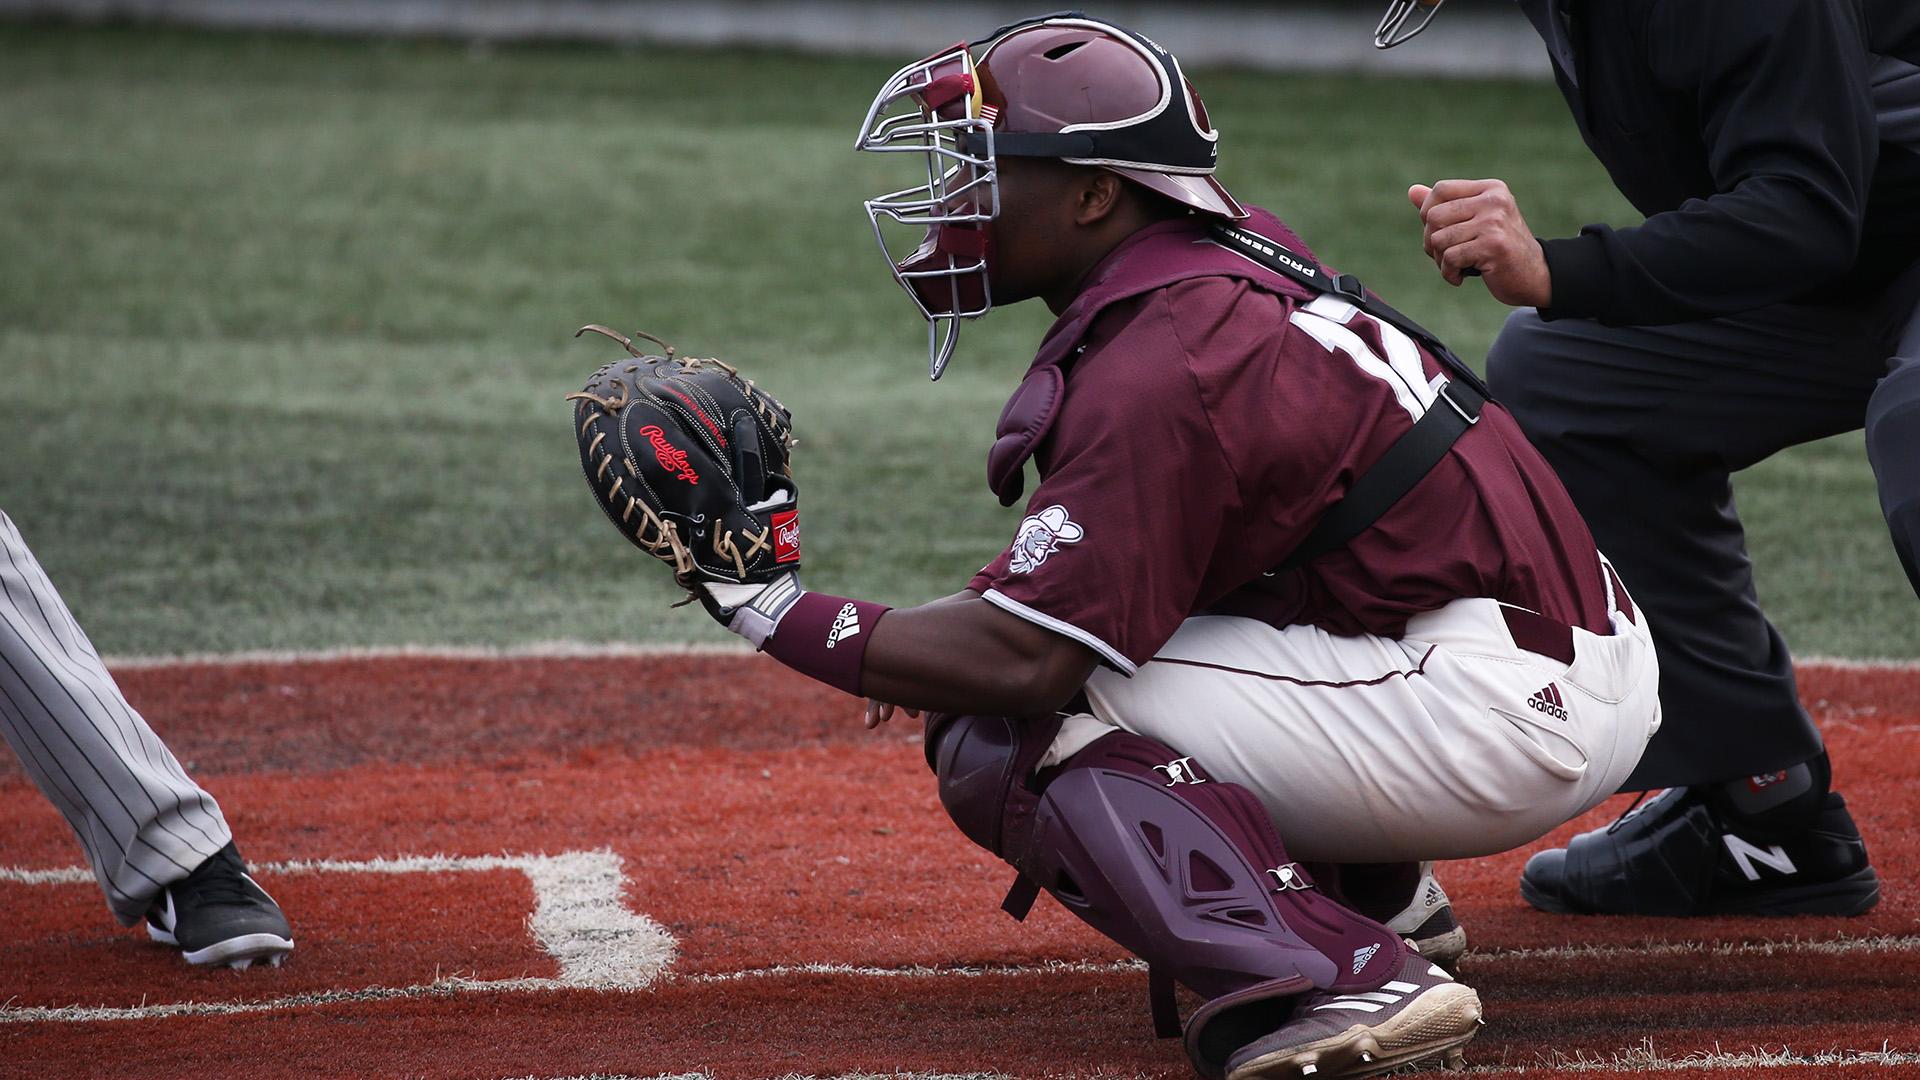 A.J. Lewis On Watch List For Nation's Top Catcher